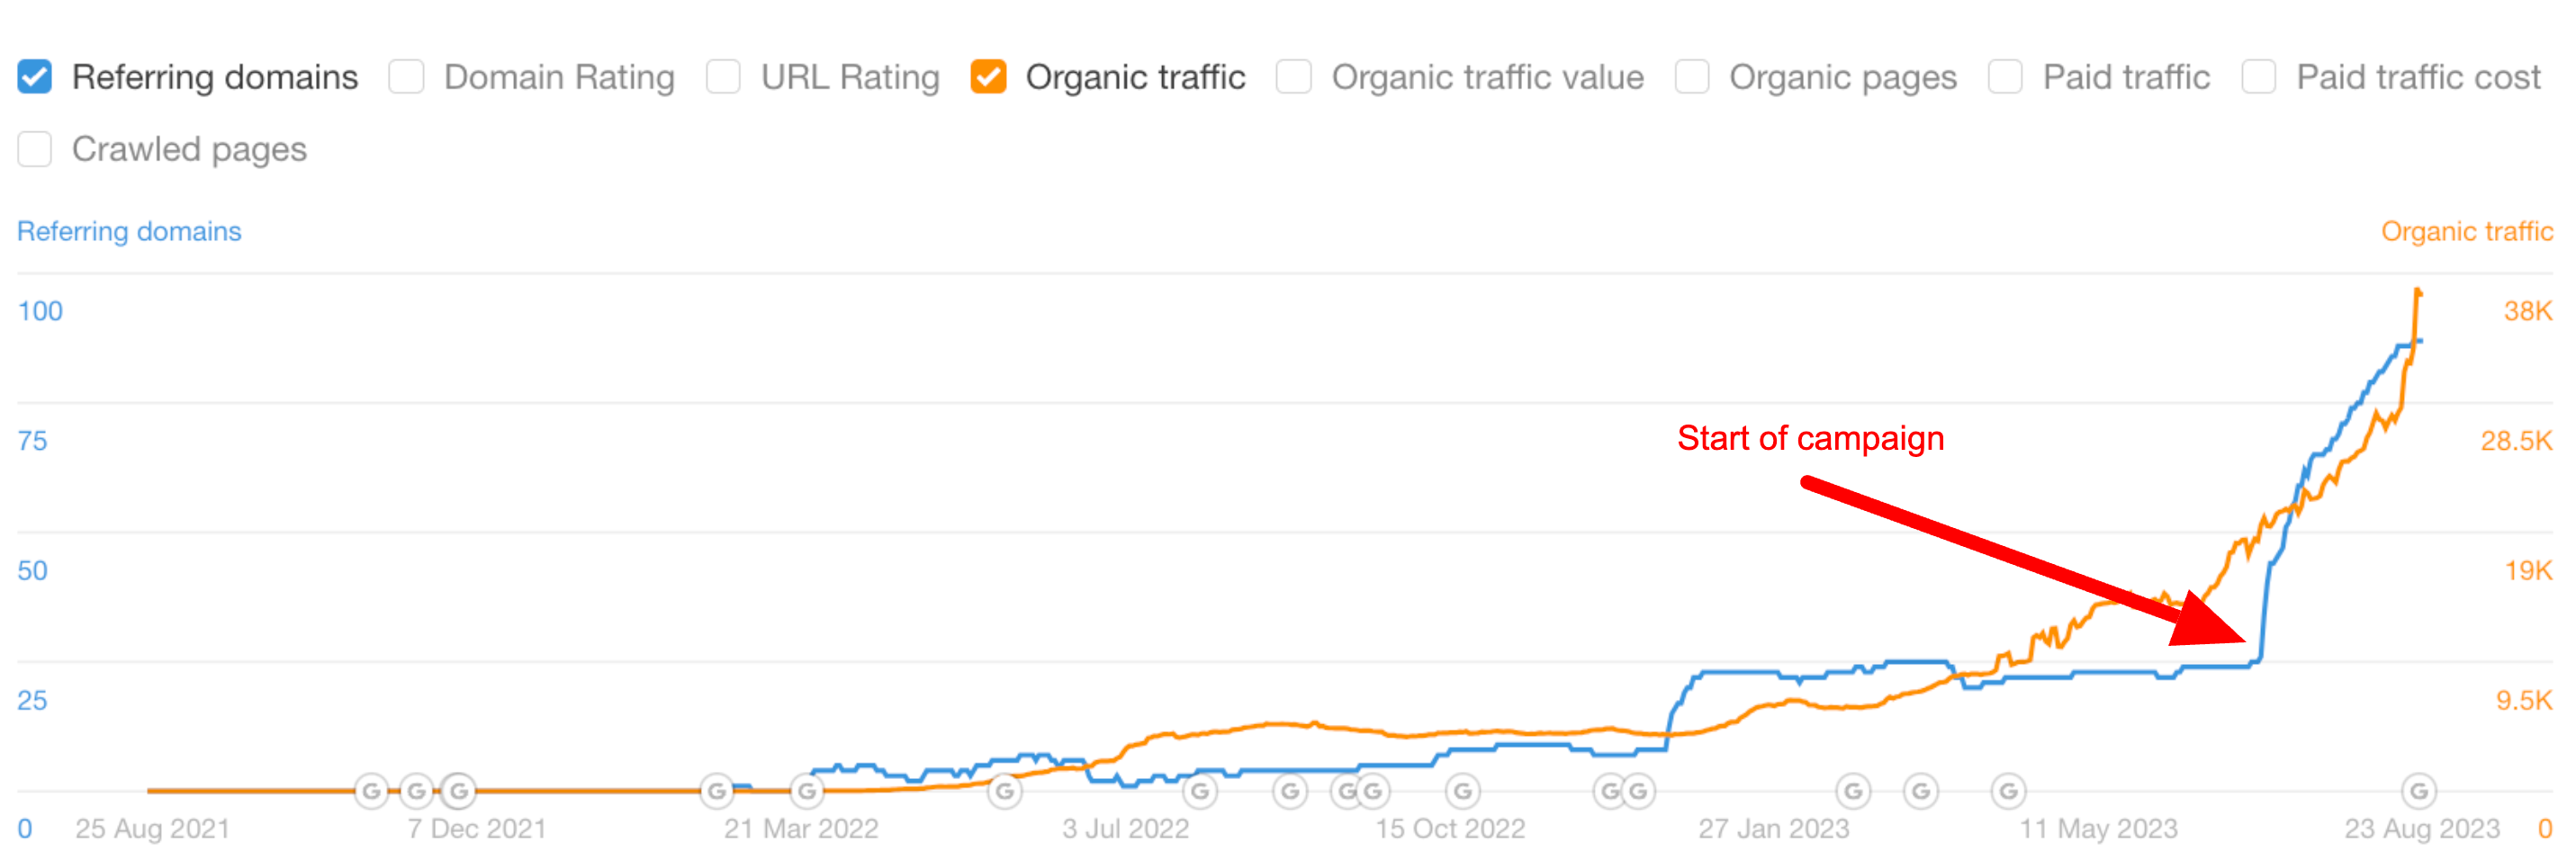 Screenshot from Ahrefs showing traffic results